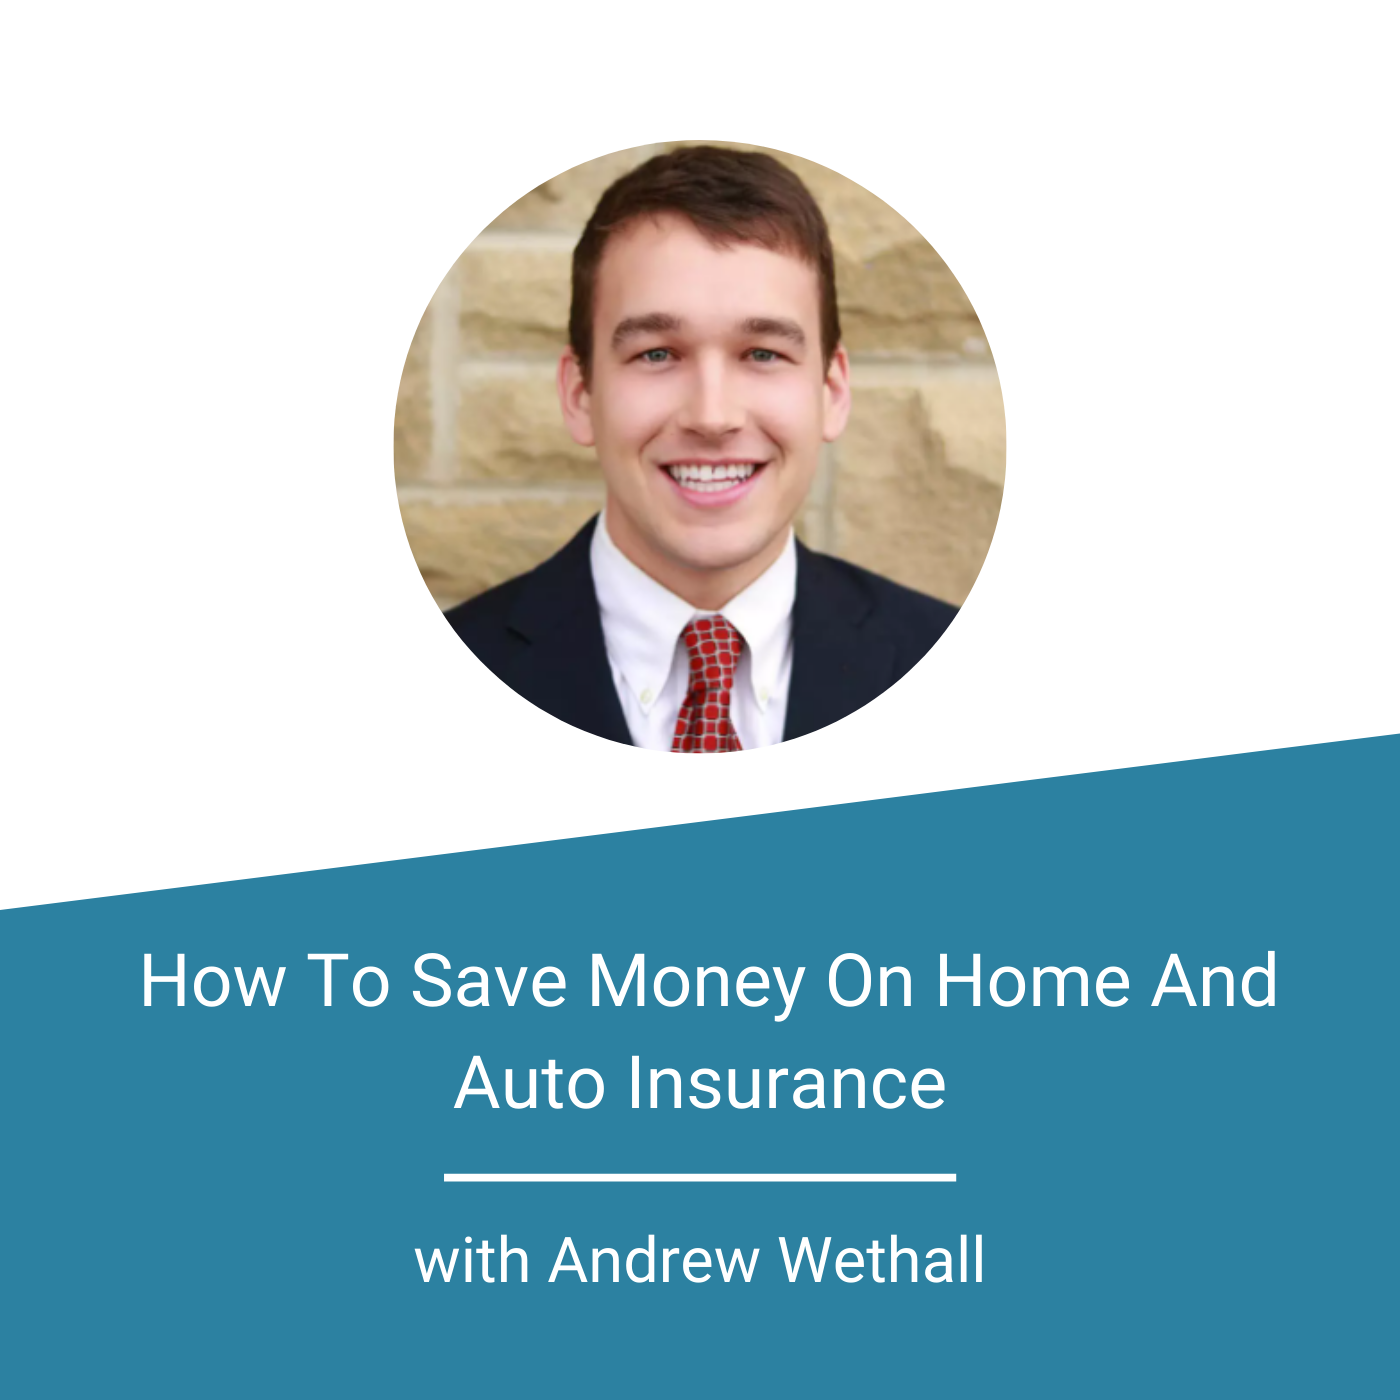 Featured Image Andrew Wethall ( How To Save Money On Home And Auto Insurance)